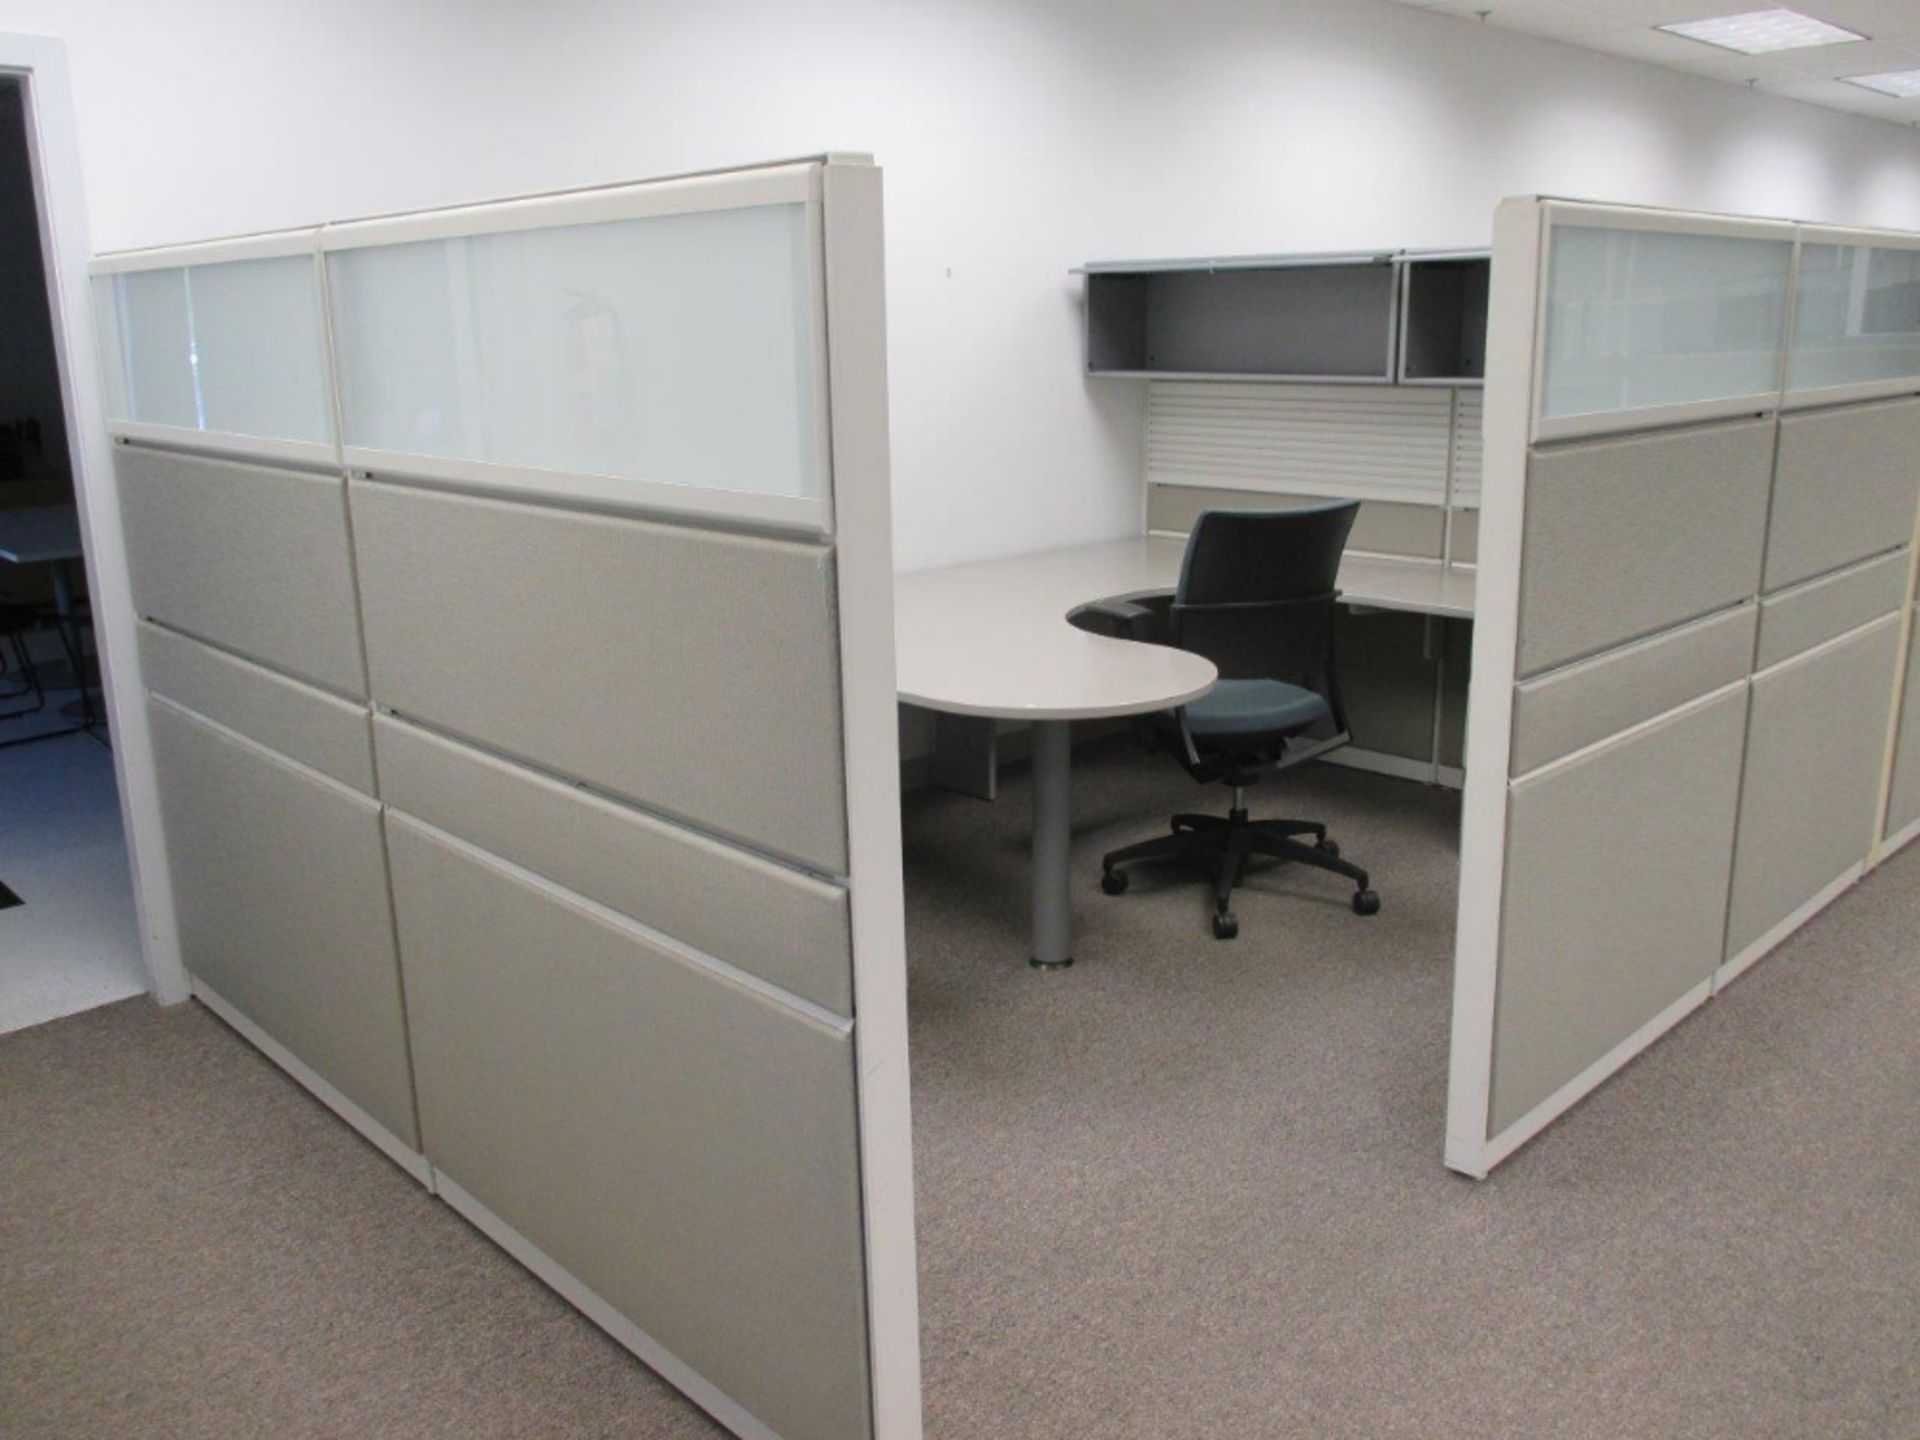 2008 Tecknion T Shaped 2 Station Cubicle w/ 1 Freestanding divider - Image 2 of 3